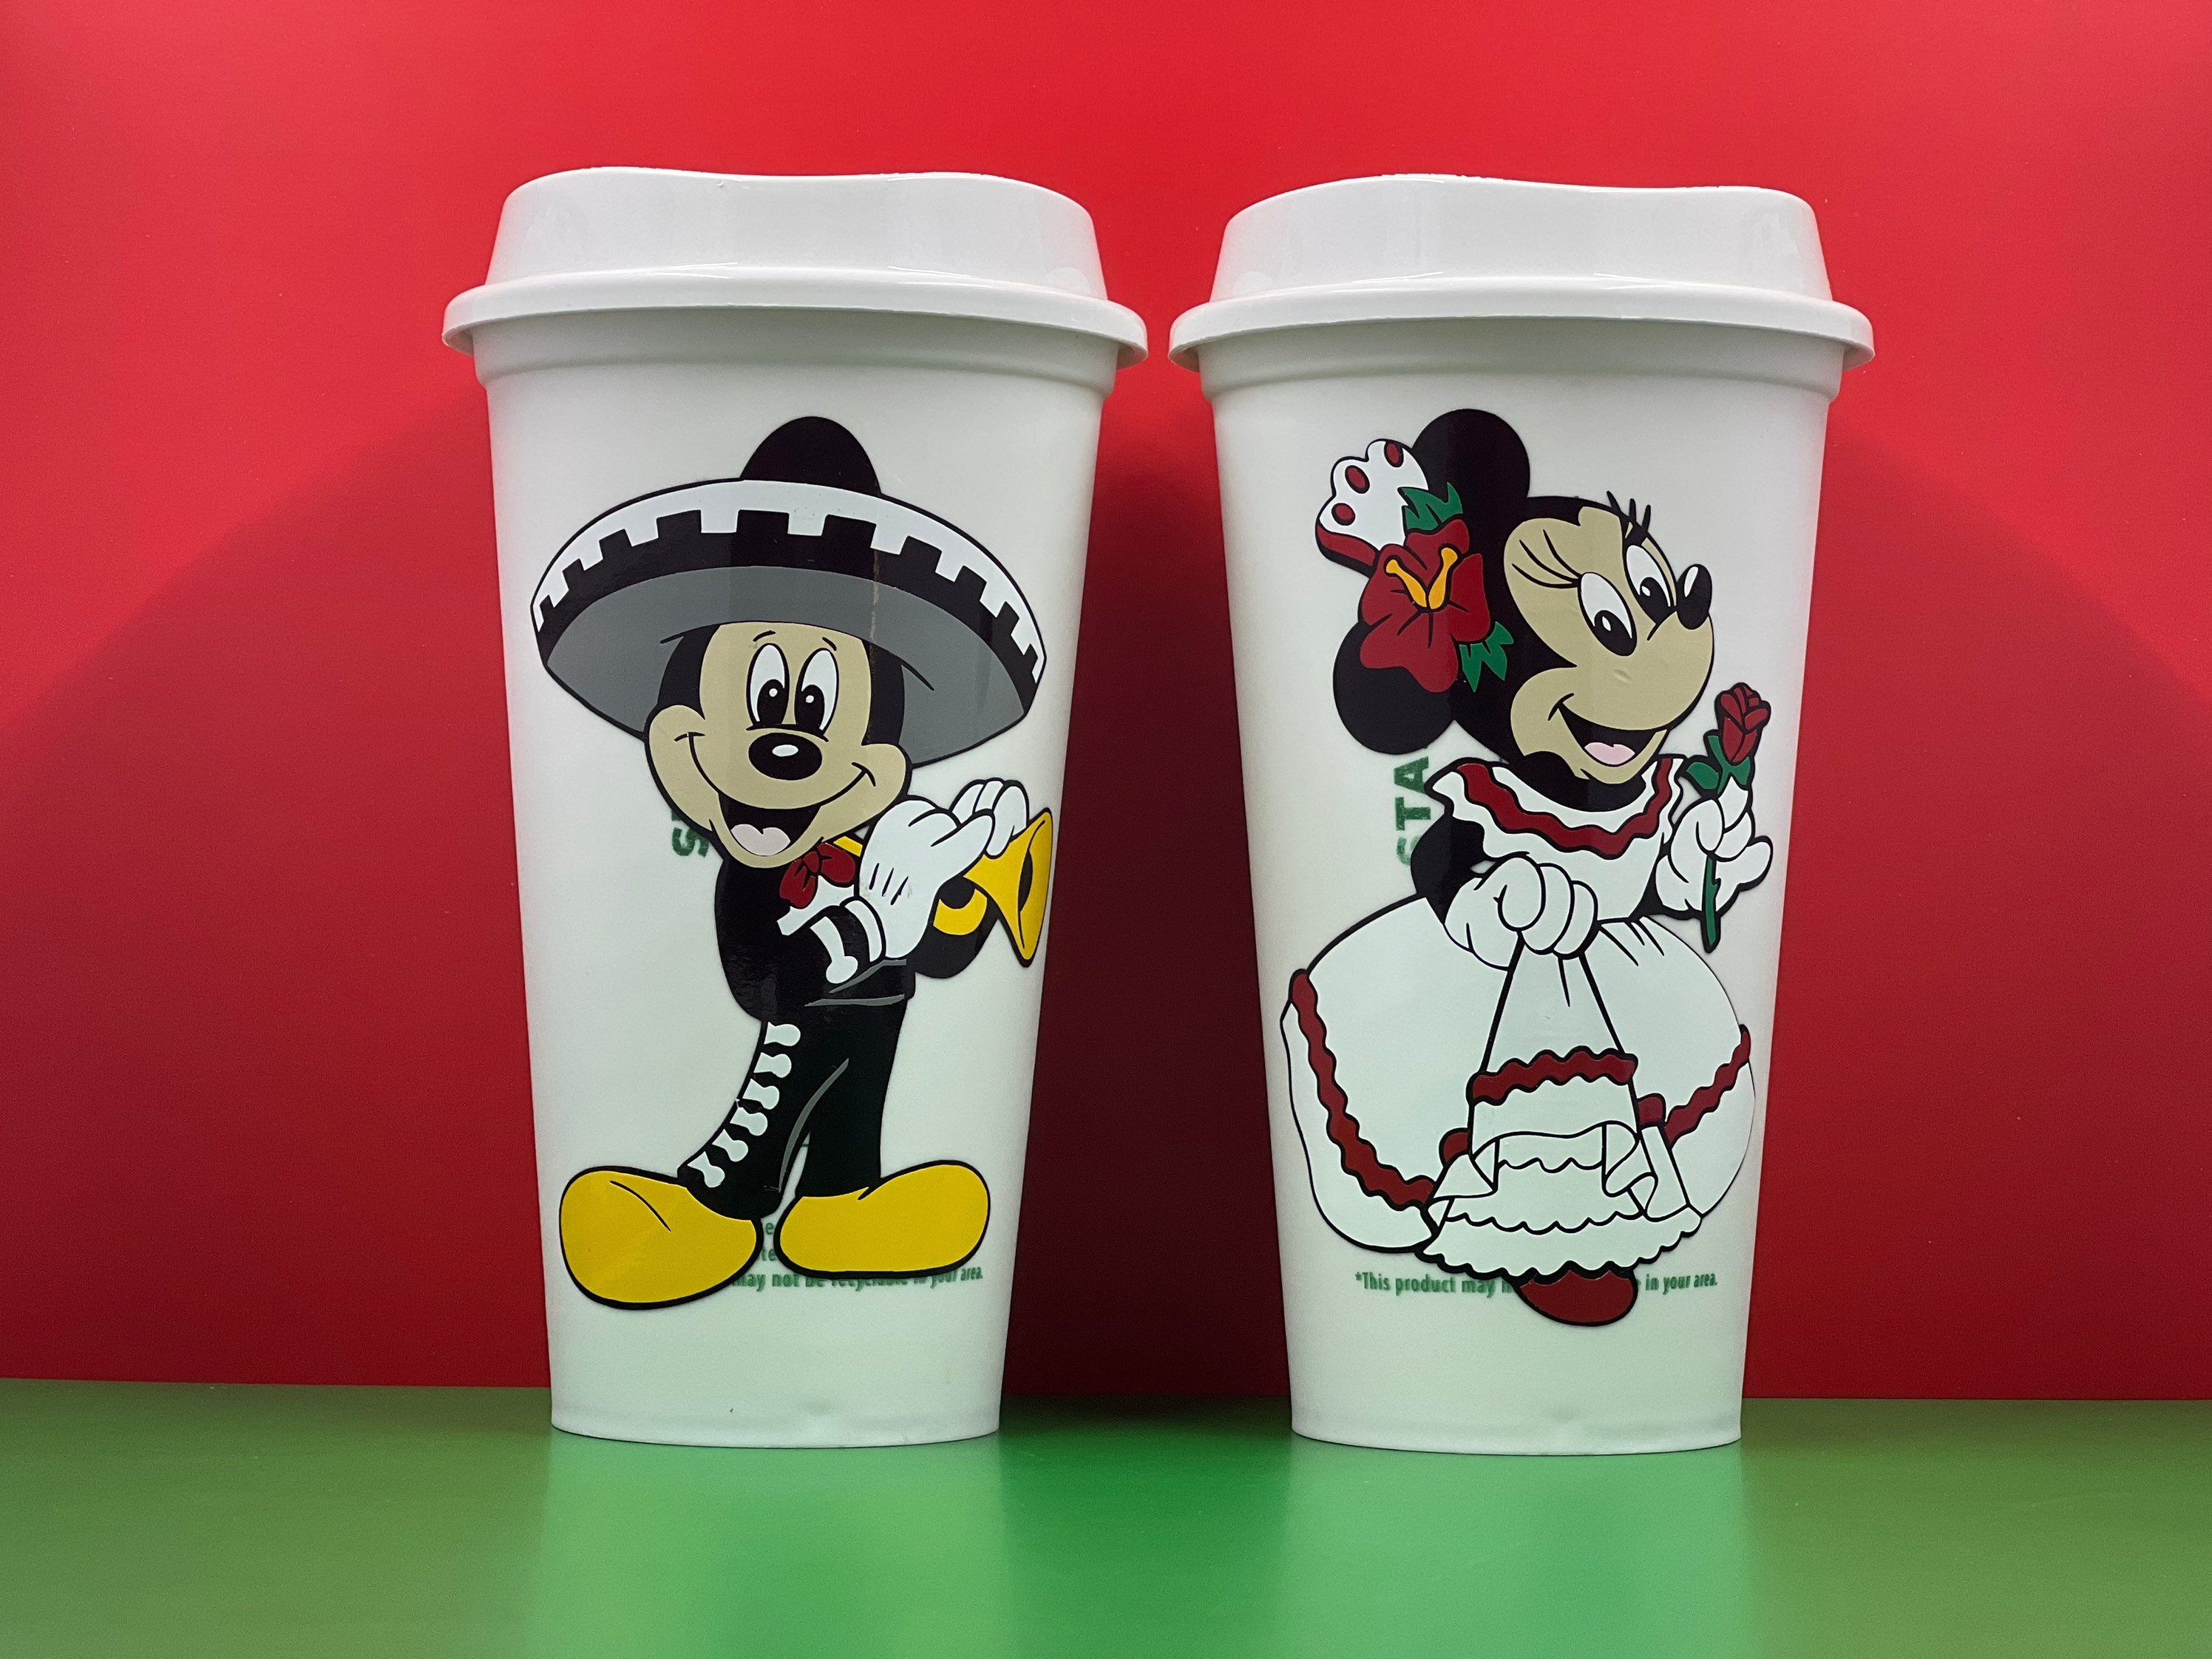 Mickey Mouse Inspired Starbucks Cup, Mickey Faces Starbucks Cup